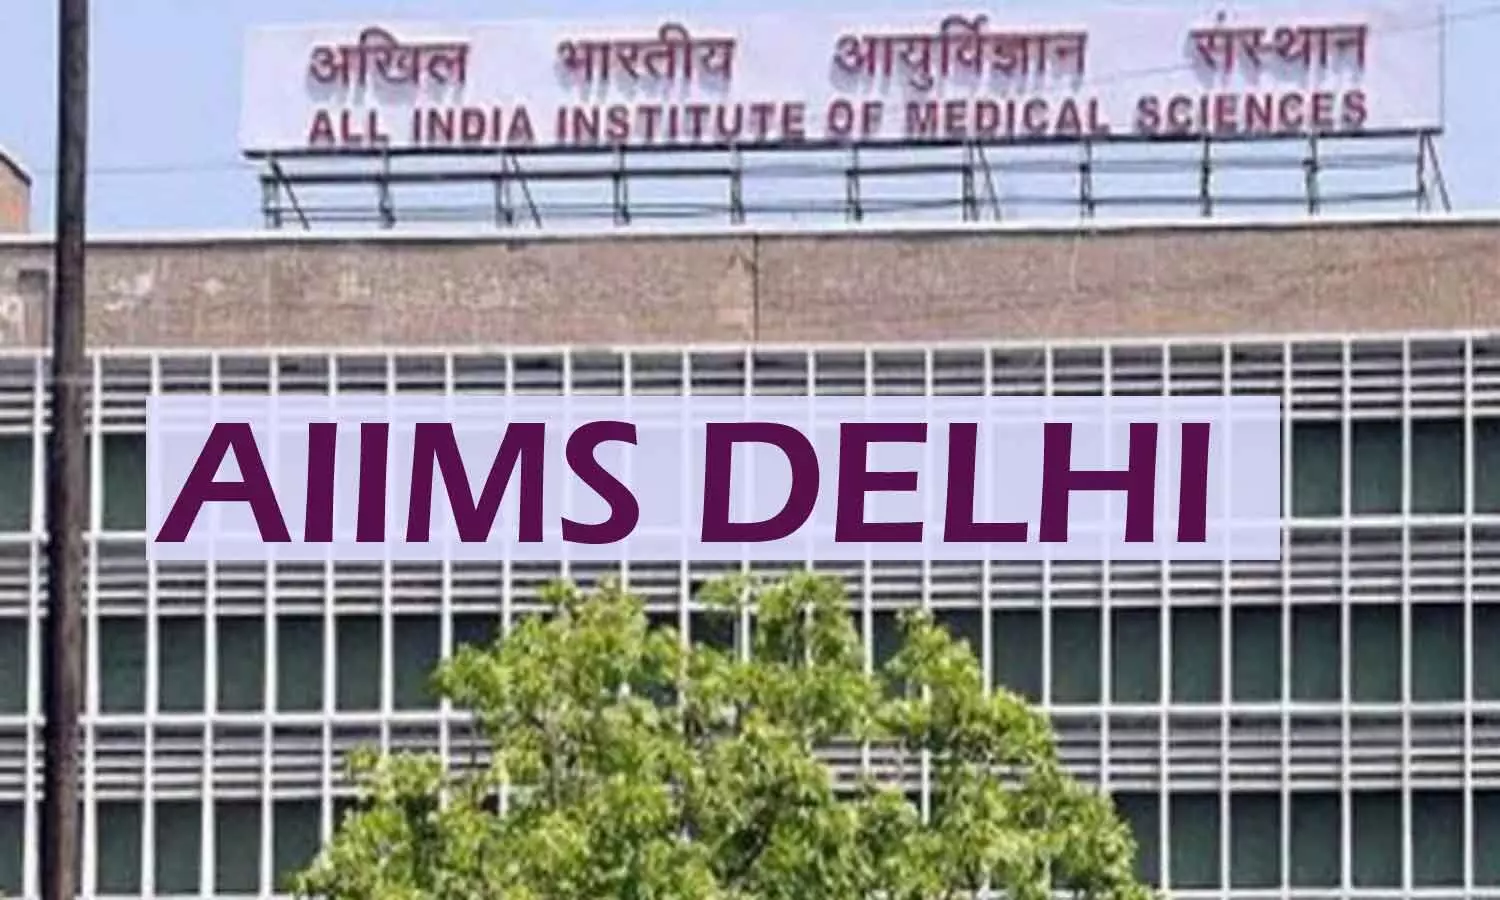 With no funds from centre, AIIMS Delhi Spent Rs 71 crore on COVID-19 till November: RTI